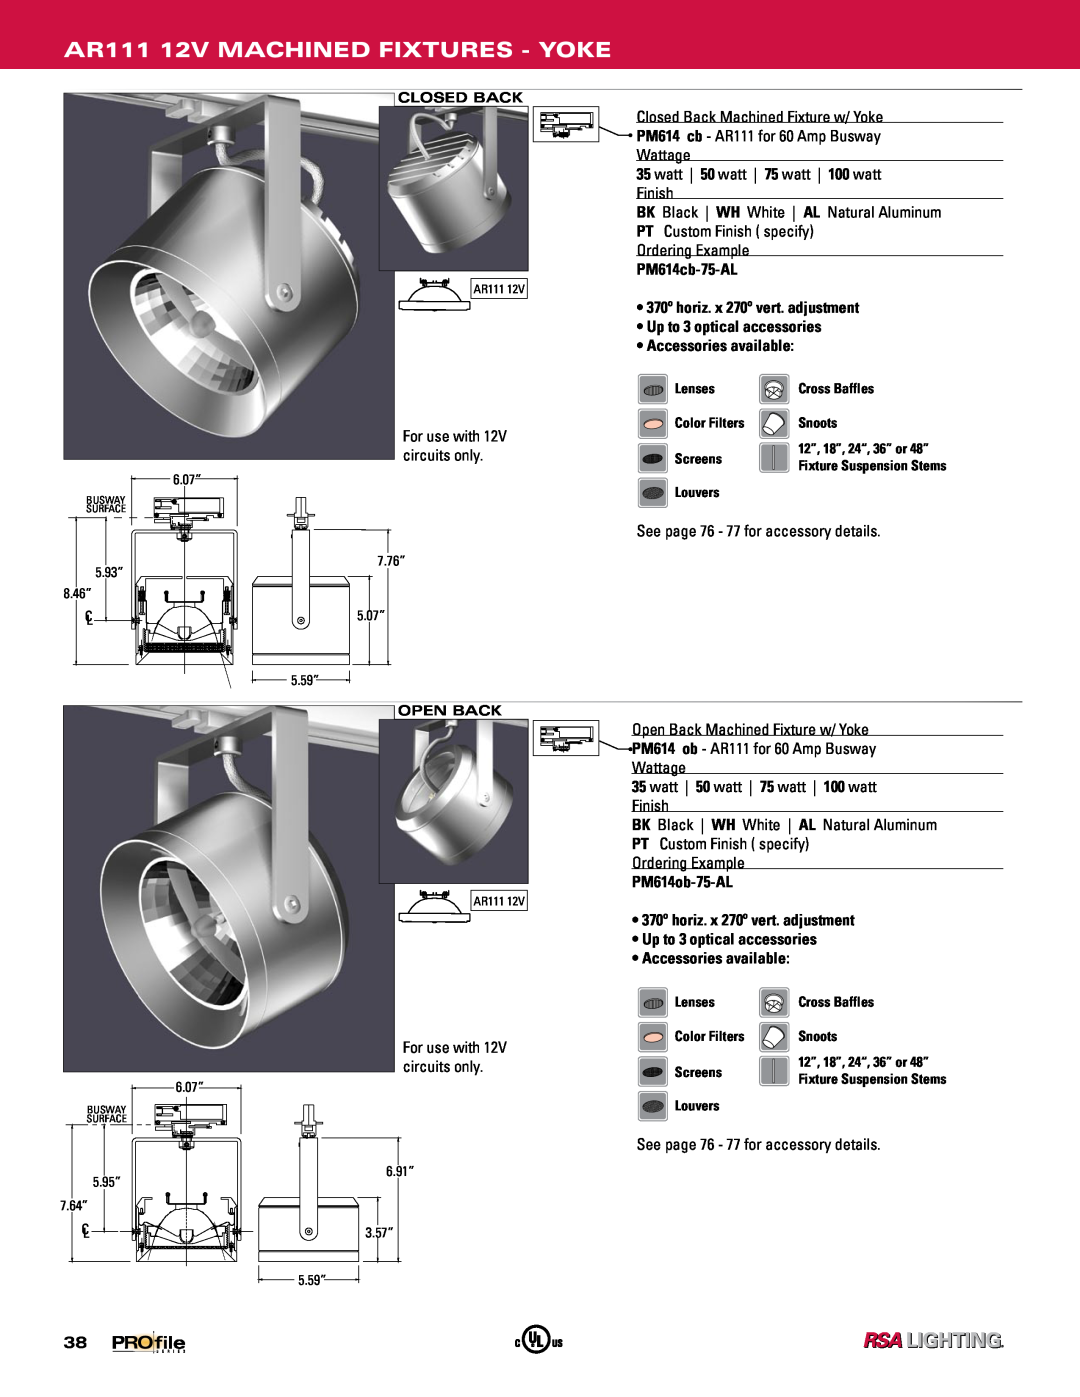 Profile Machined Aluminum Fixtures manual AR111 12V MACHINED FIXTURES - YOKE, PM614cb-75-AL, Up to 3 optical accessories 